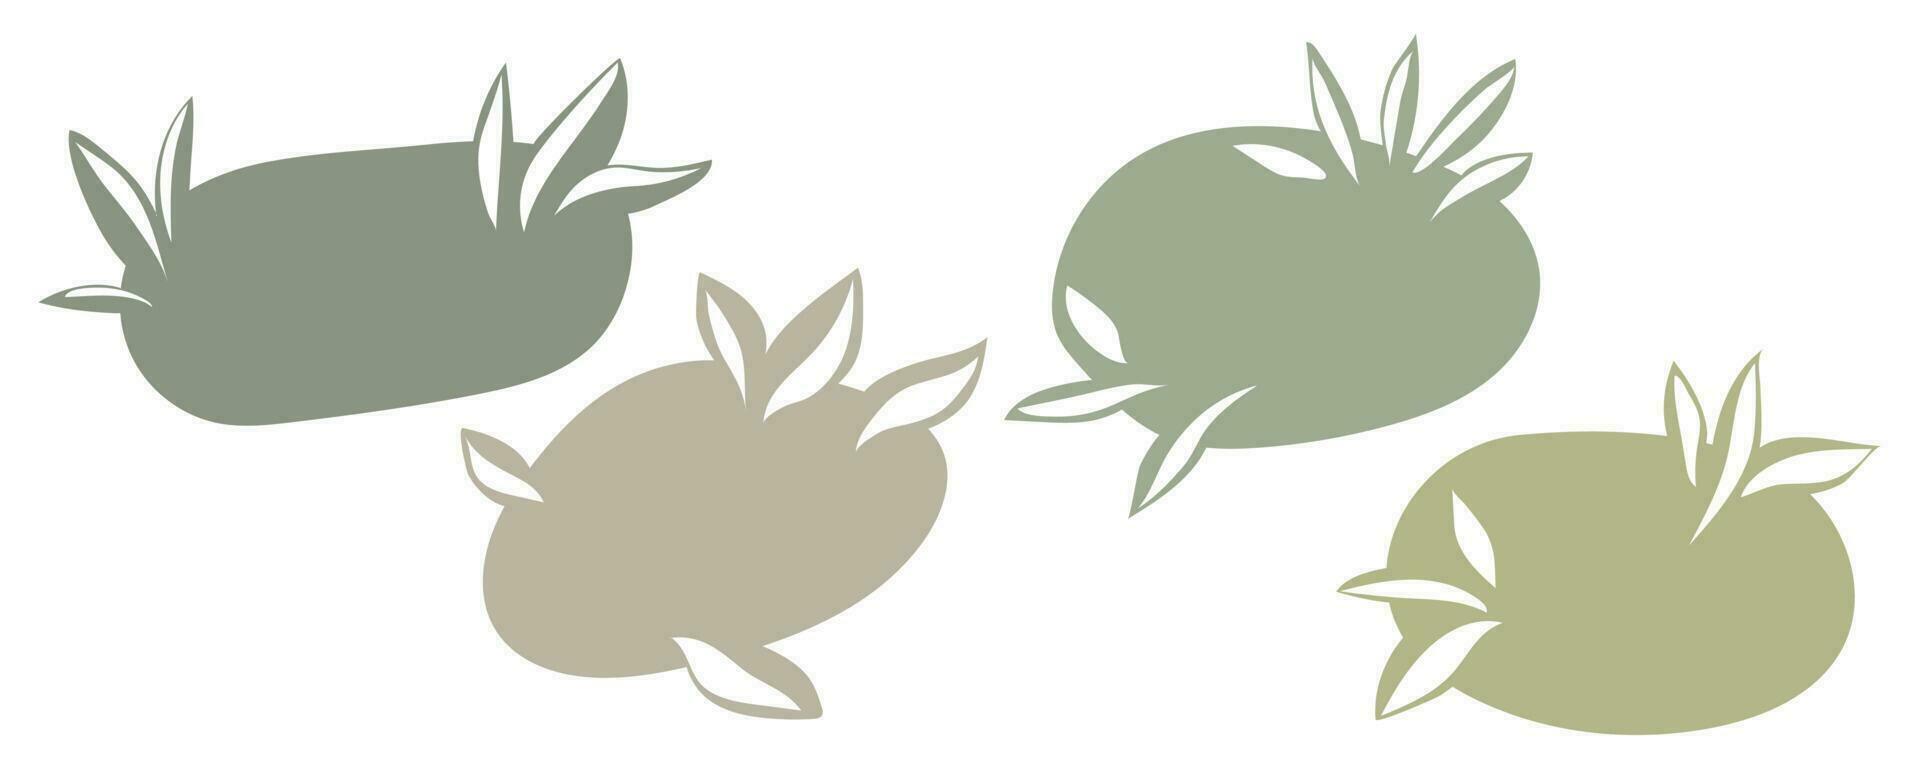 Organic amoeba drop shape shades of natural flowers with leaves. vector illustration. isolated on a transparent background. A set of graphic elements of irregular round shape in the form of a blob